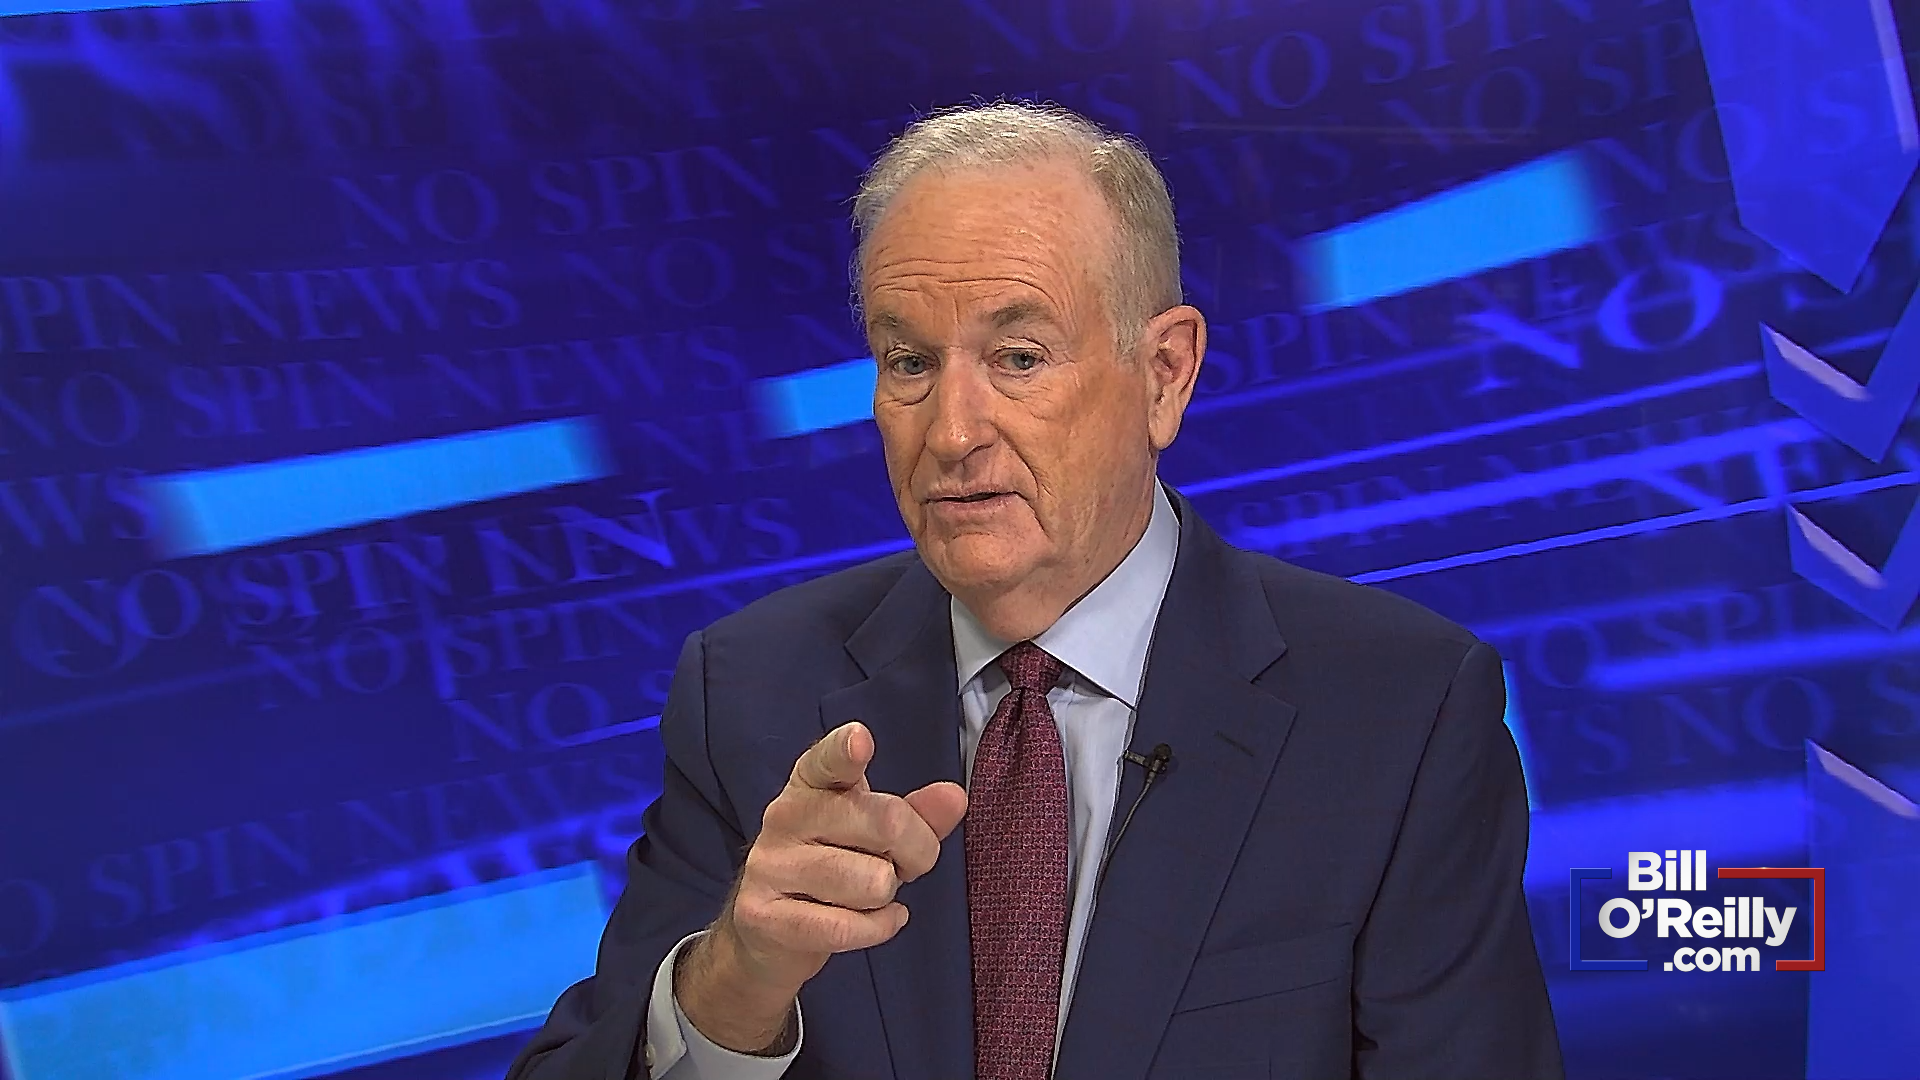 O'Reilly: Donald Trump Would Be Wise To Step Aside From Russian Involvement